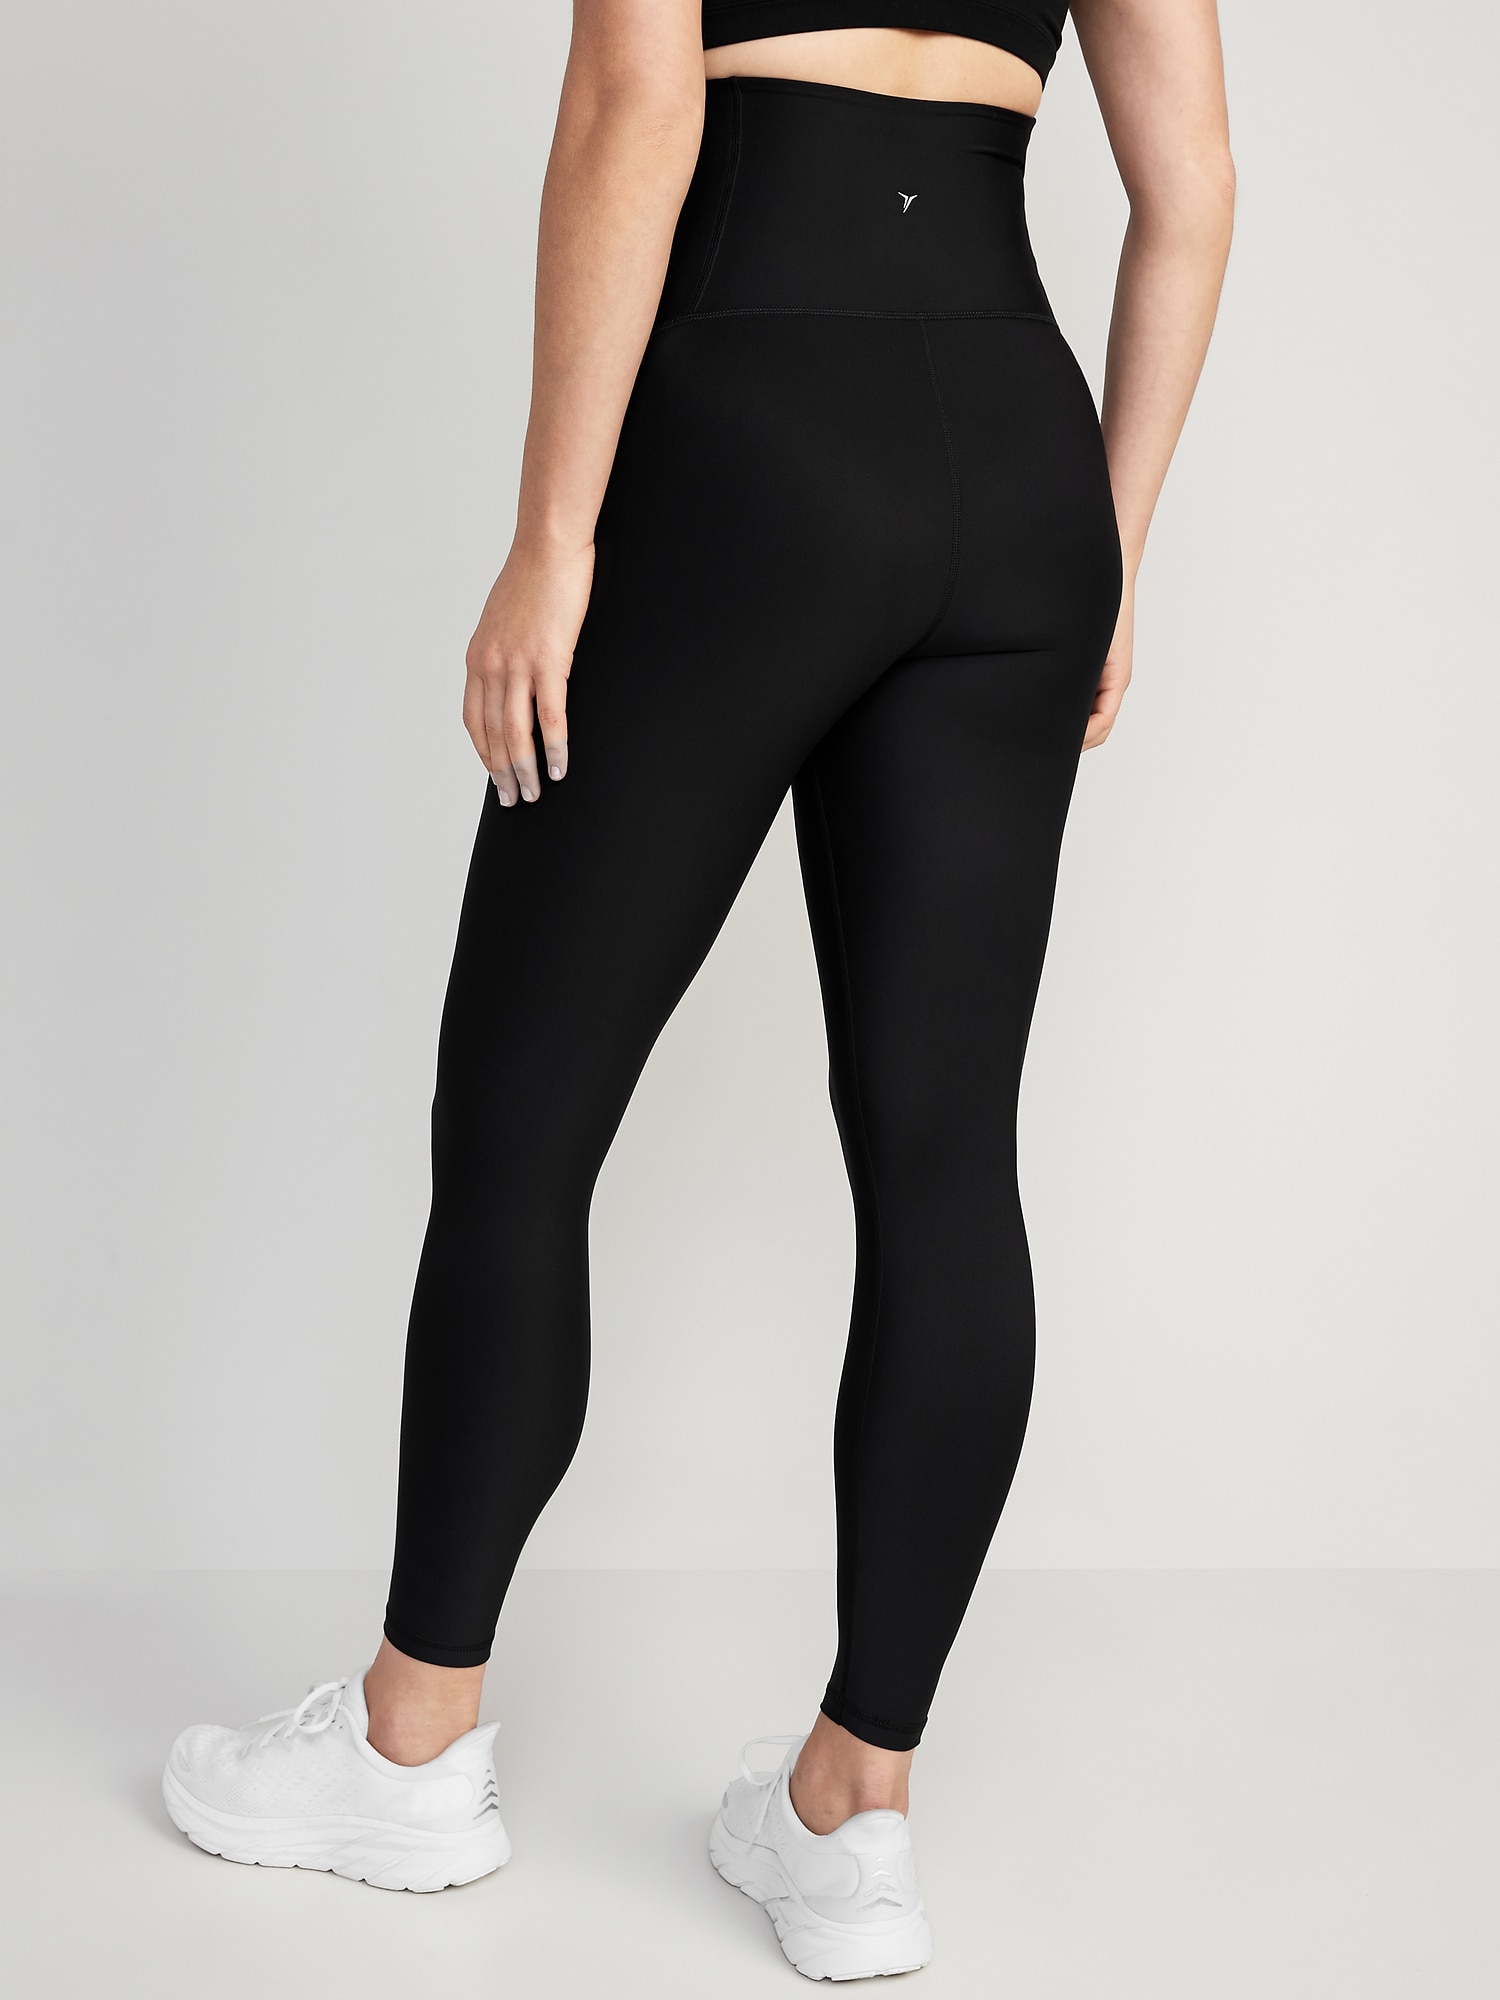 Shop Gap Maternity Leggings up to 85% Off